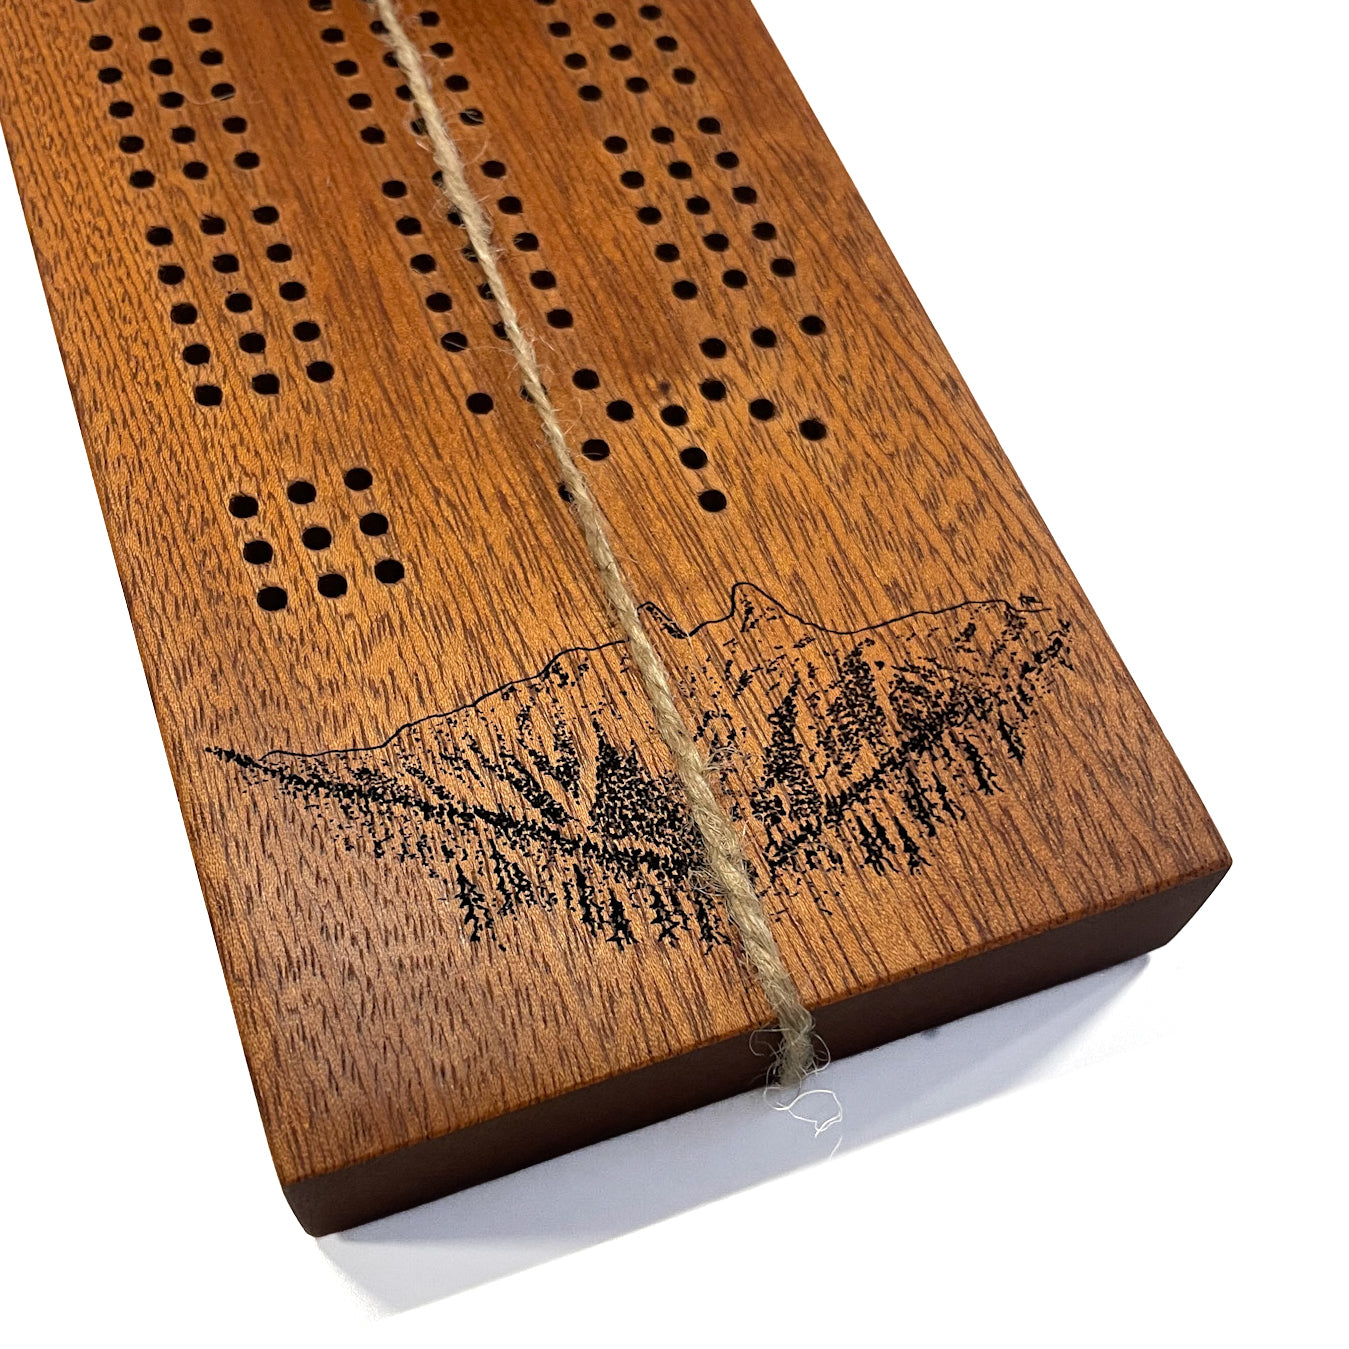 Mahogany Cribbage Board (Two Sisters / The Lions Mountain Peaks)